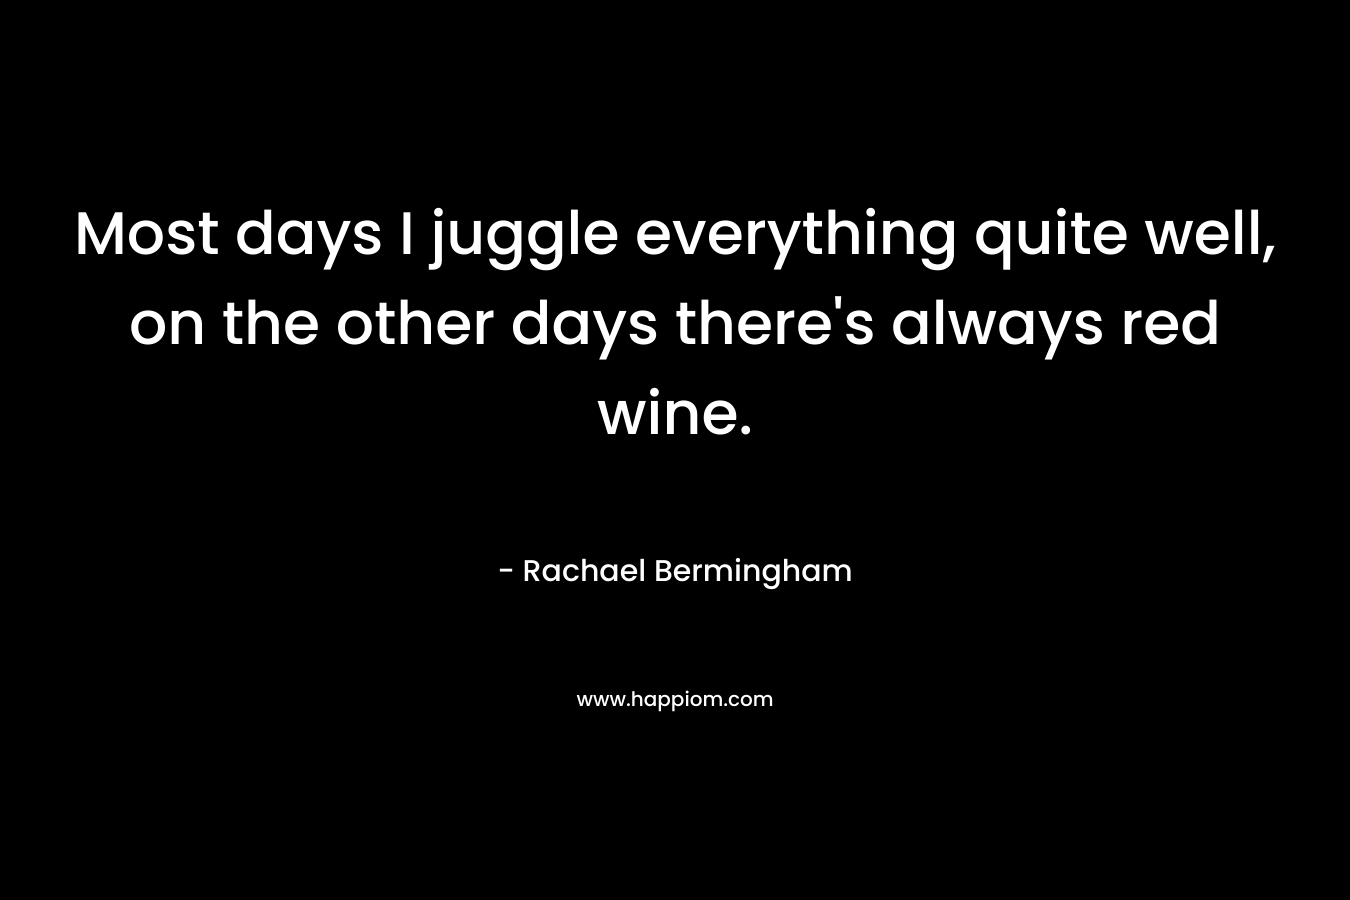 Most days I juggle everything quite well, on the other days there’s always red wine. – Rachael Bermingham